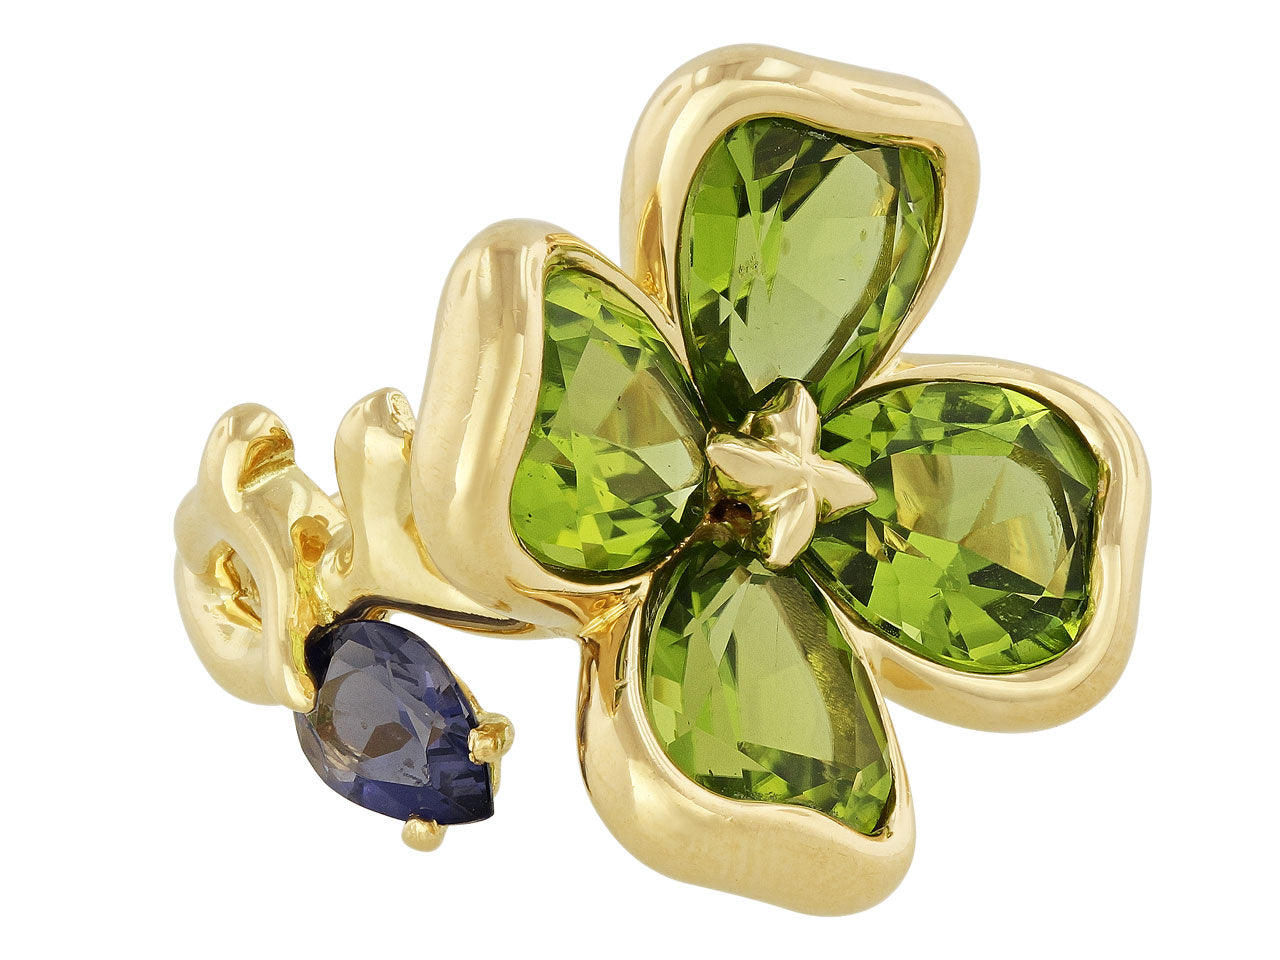 Chanel Peridot and Iolite Clover Flower Ring in 18K